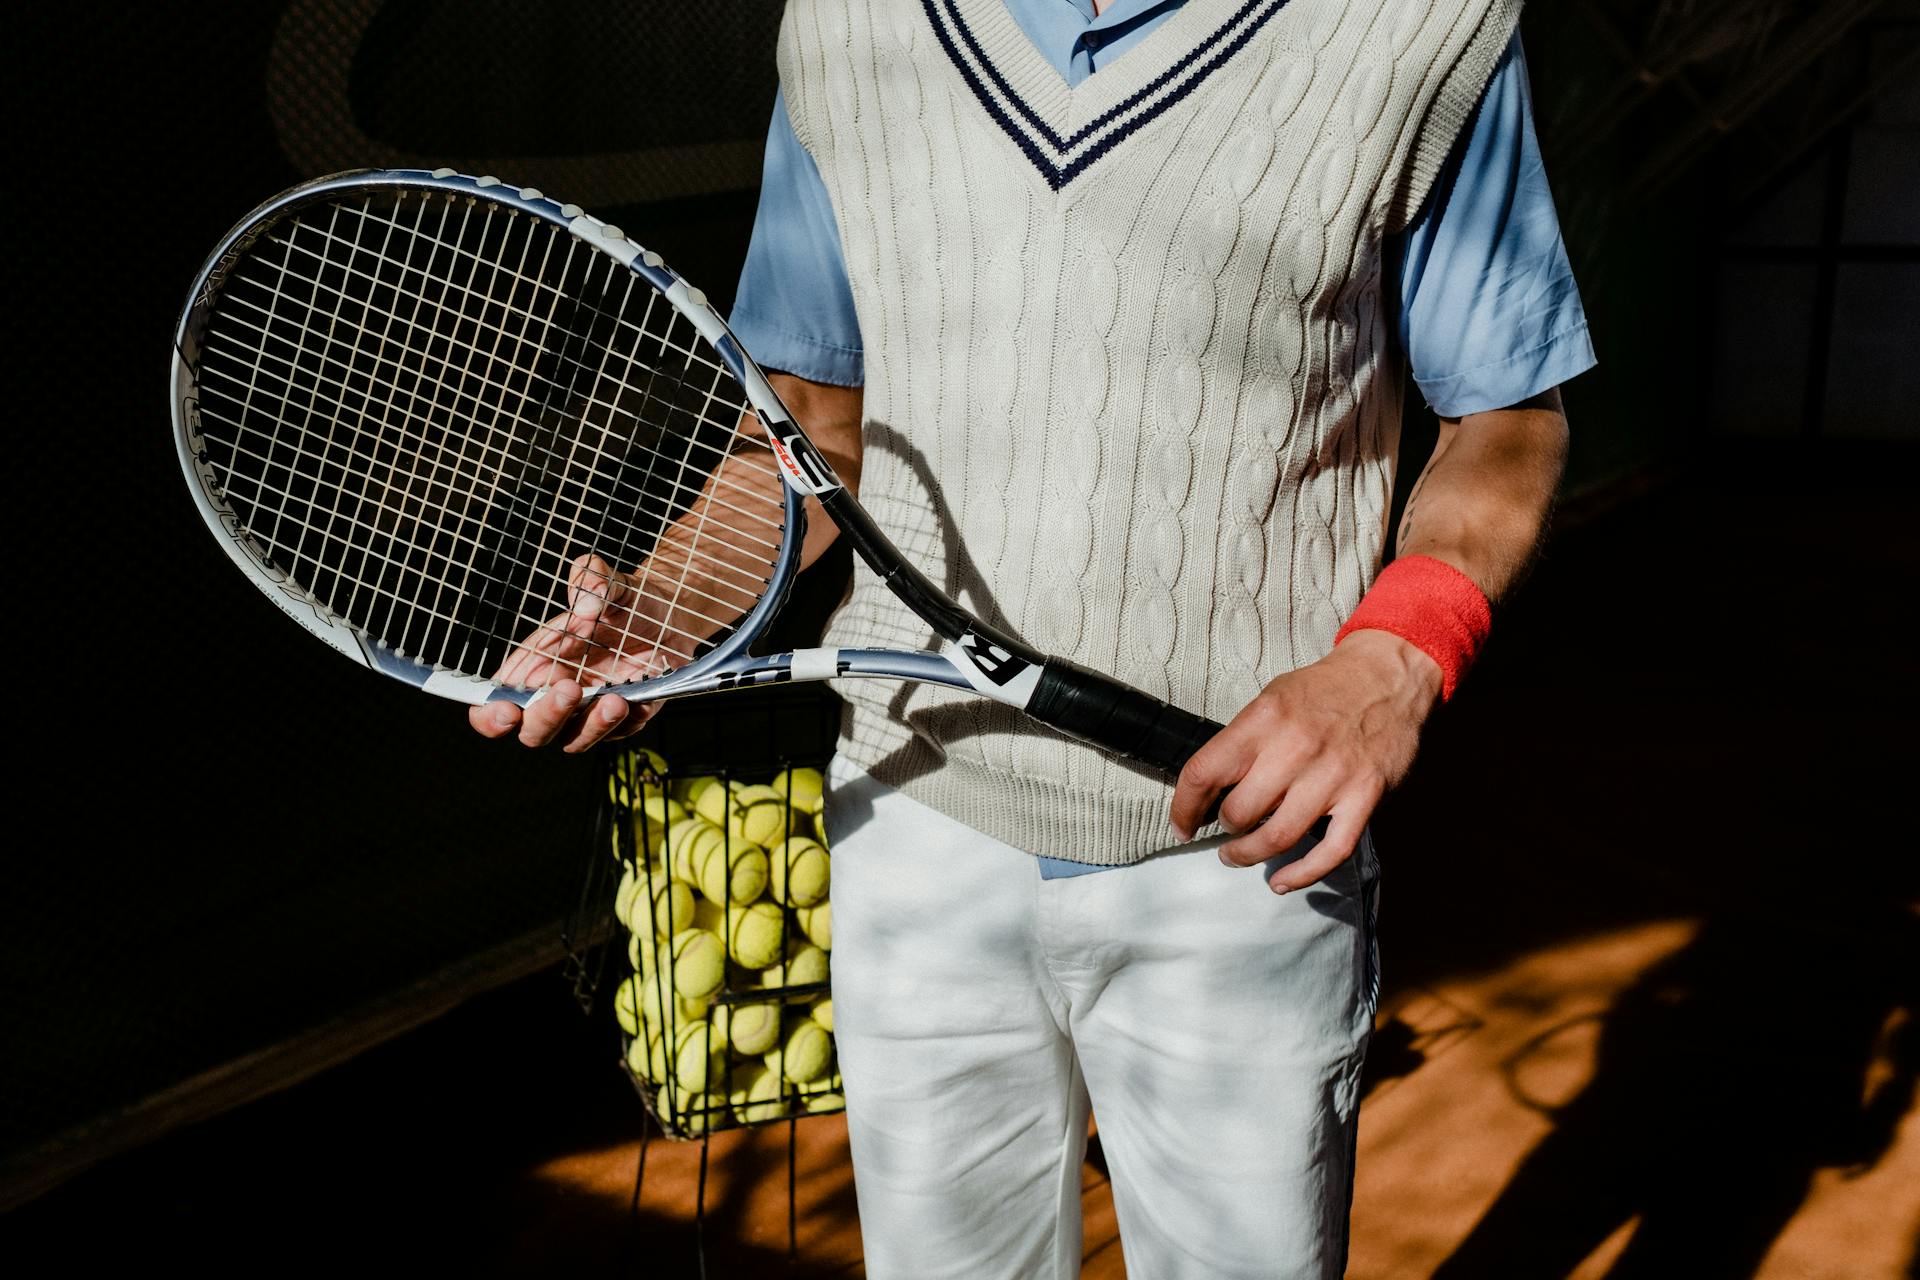 Person in Blue and White Shirt and White Pants Holding Black and White Tennis Racket